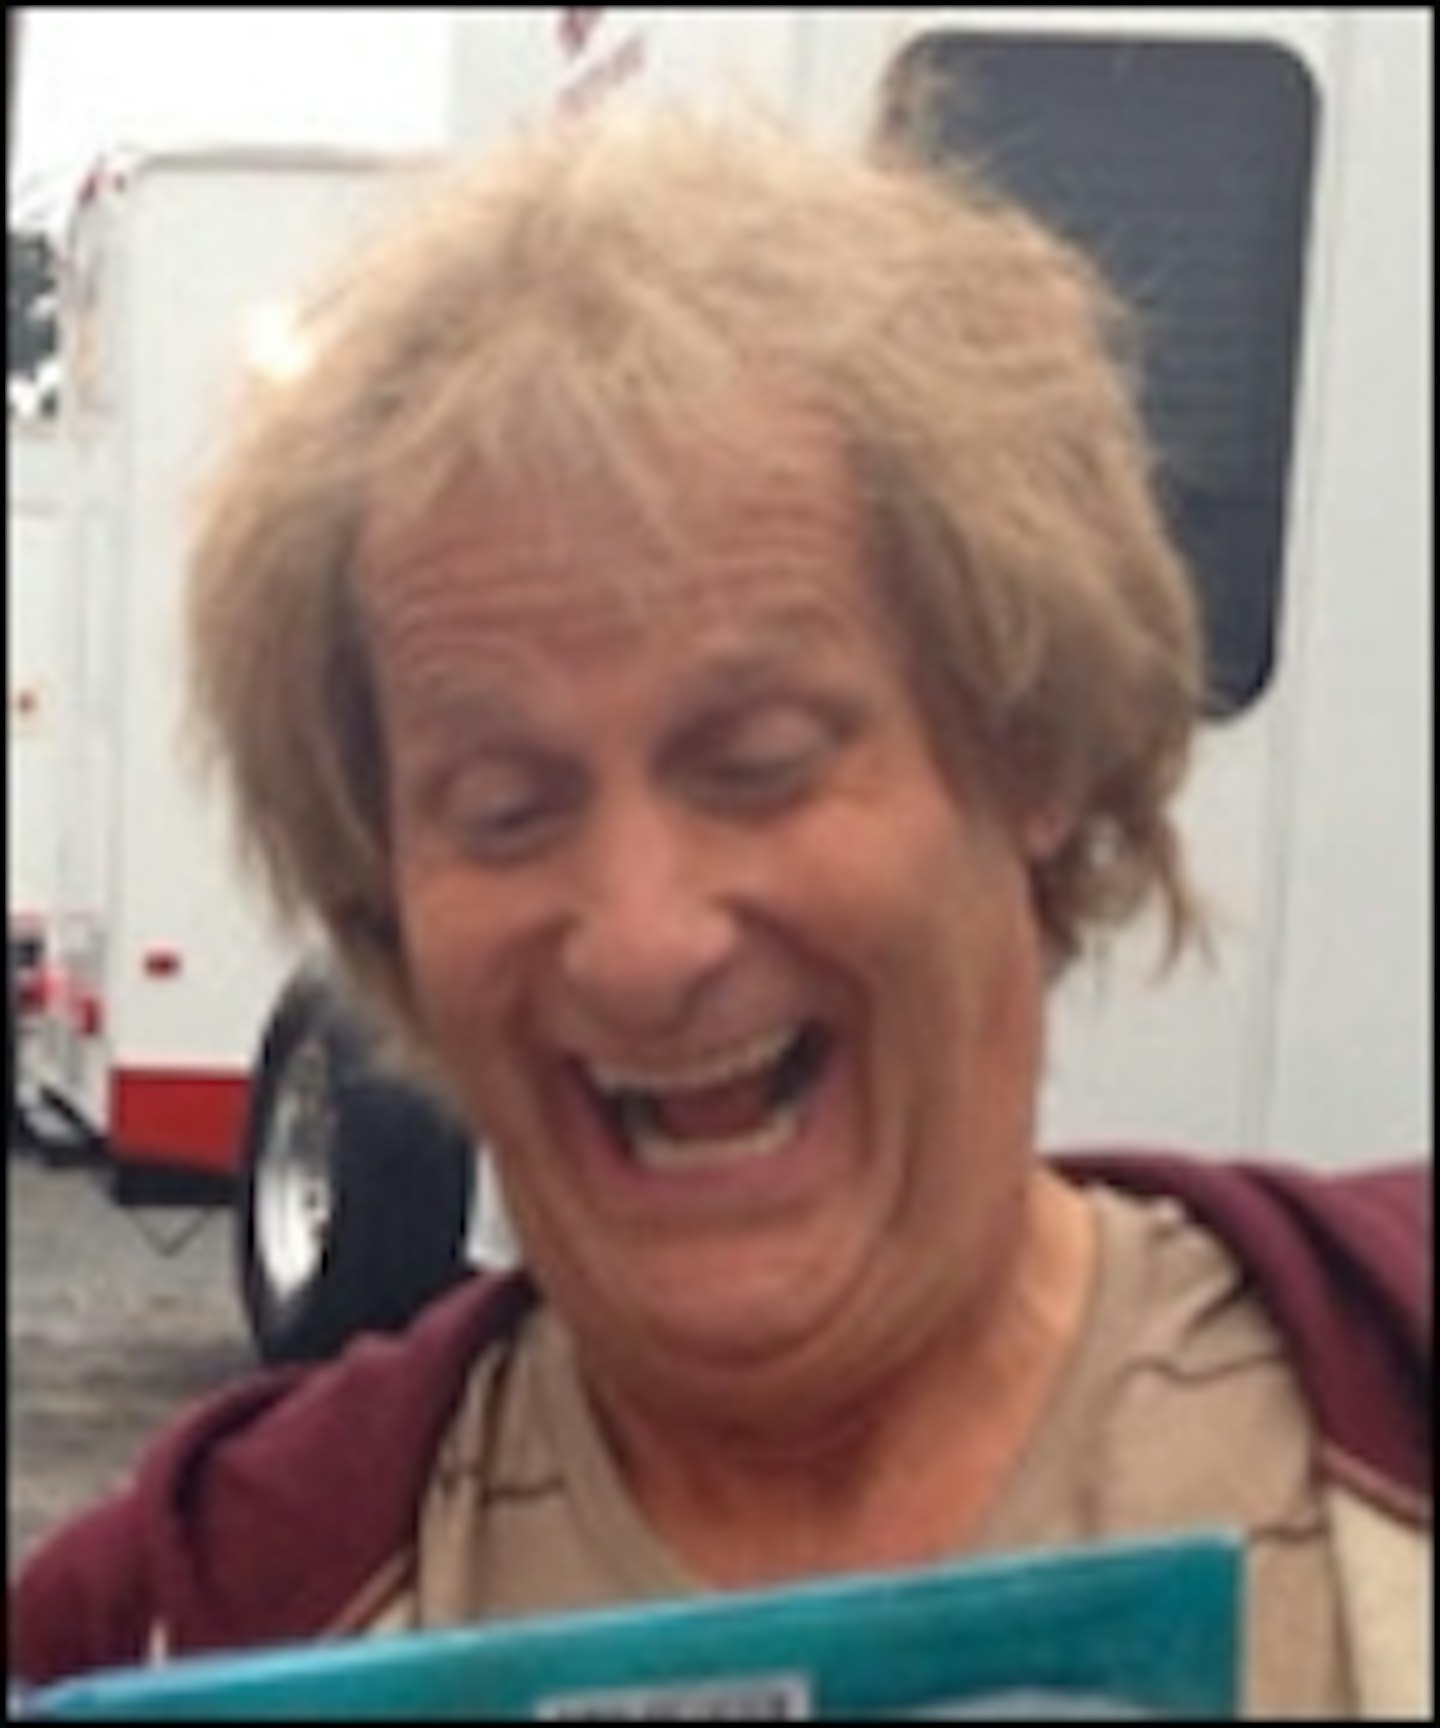 Jim Carrey And Jeff Daniels' Dumb And Dumber To Pictures